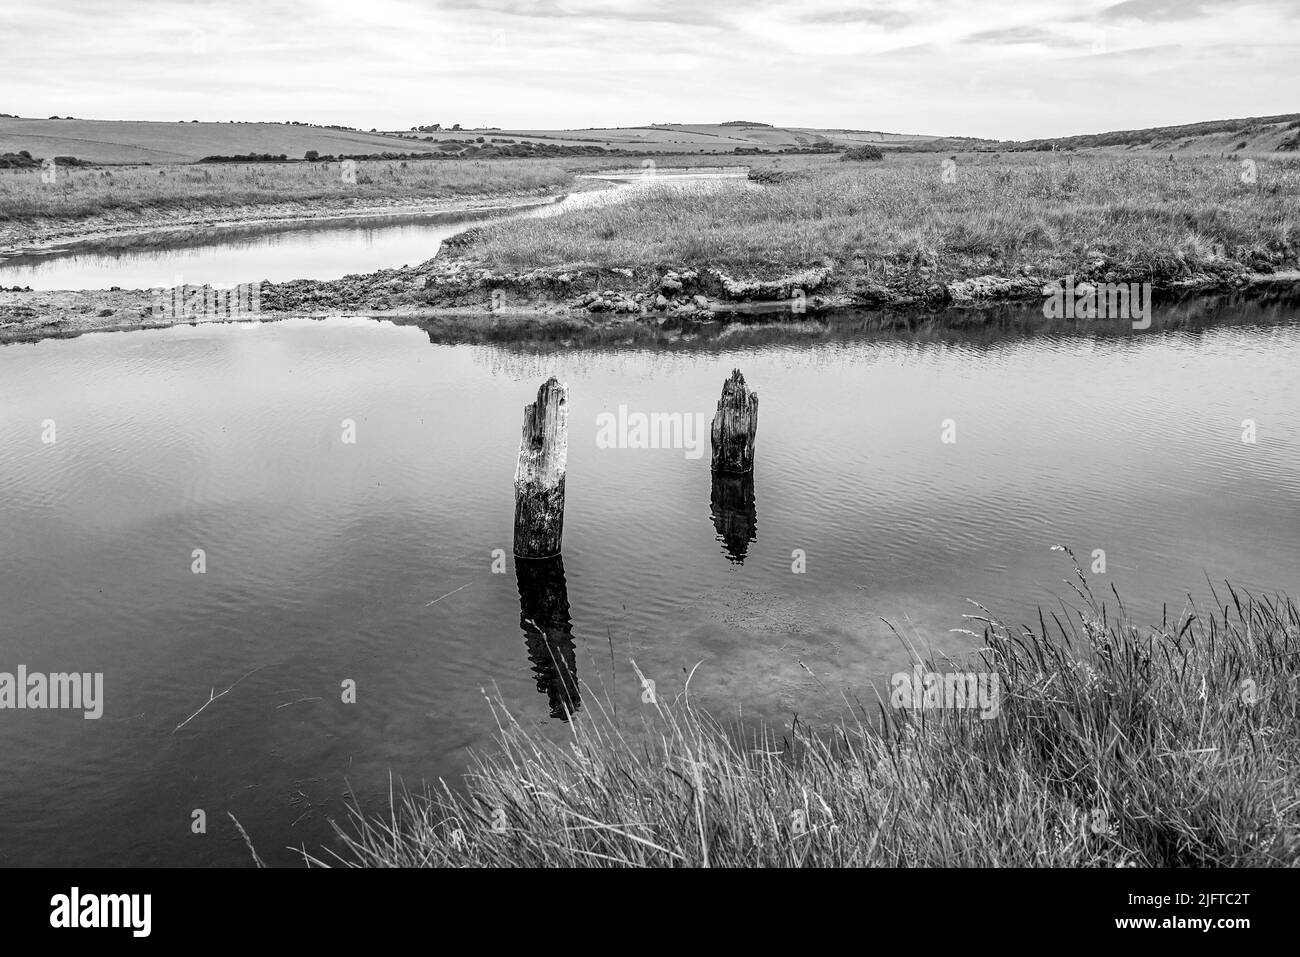 Cuckmere Haven & Seaford East Sussex England UK - Landscape showing old wooden pillars in water looking north across the flooded area Stock Photo